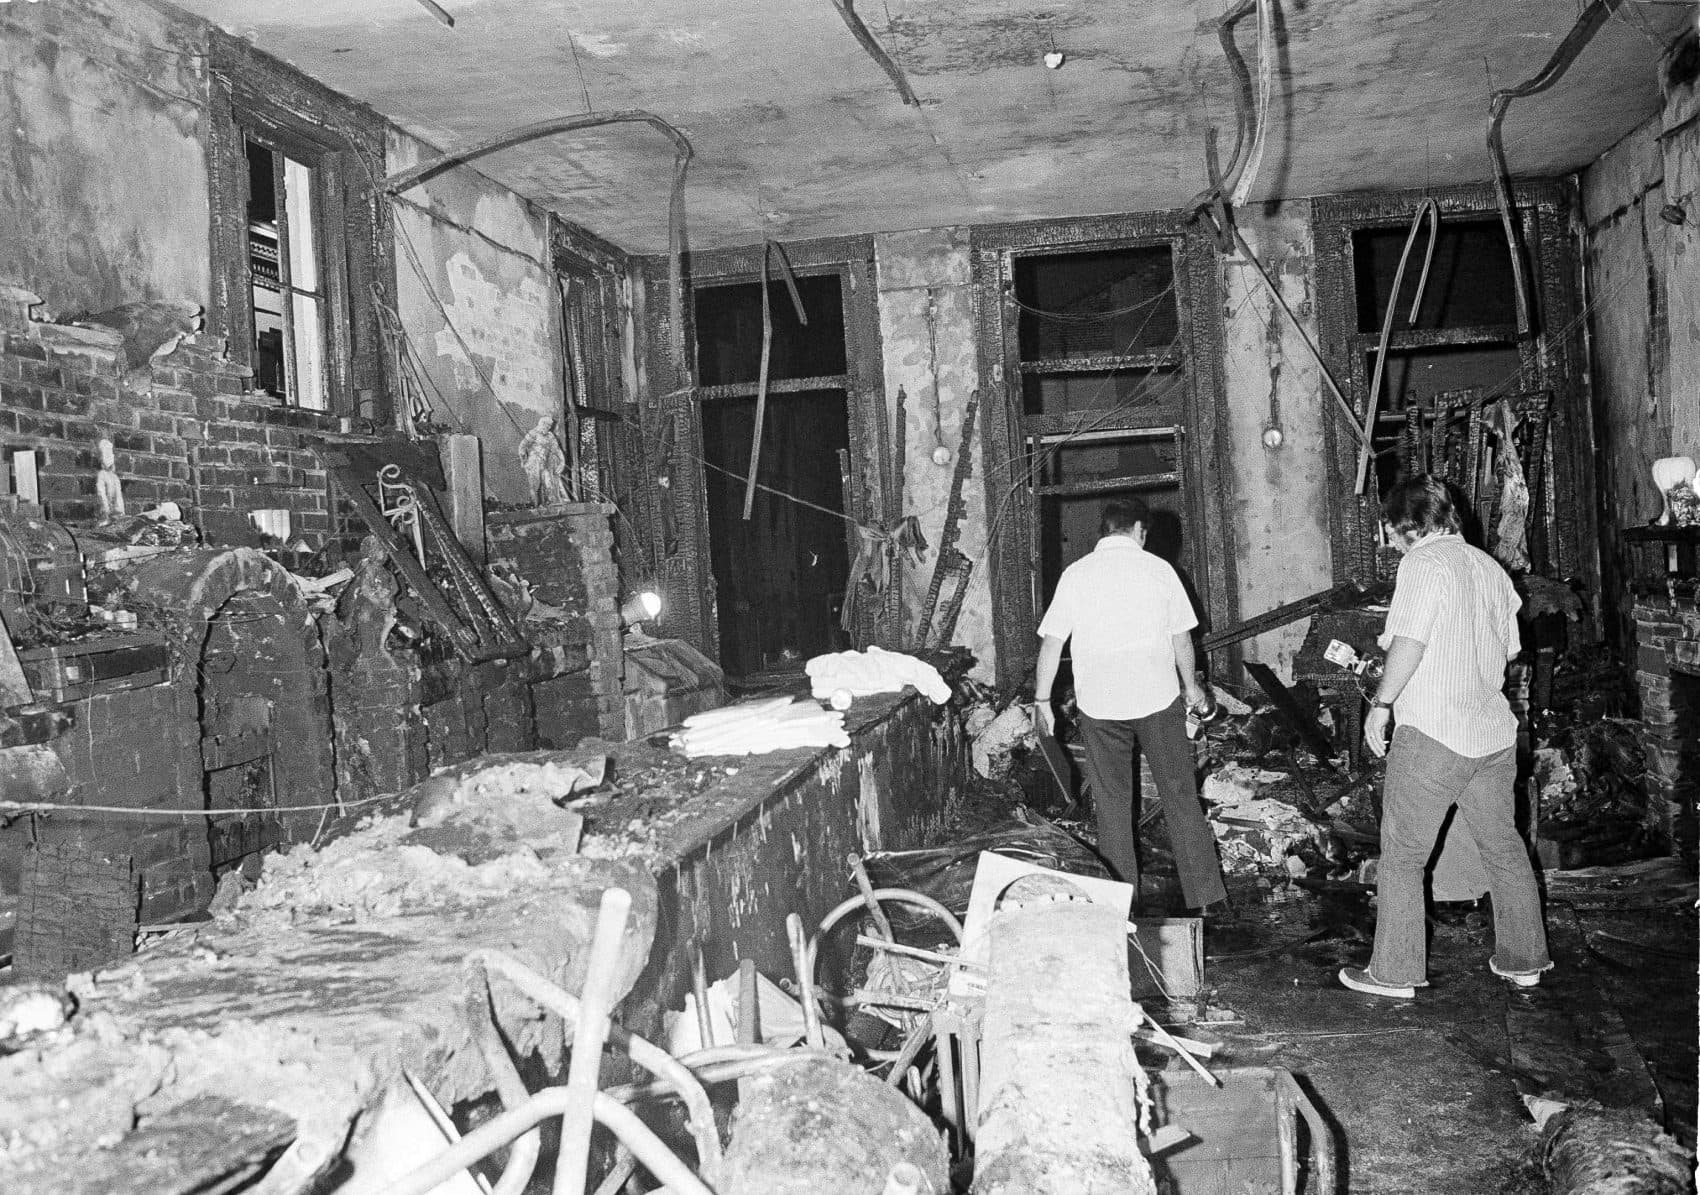 A view inside the UpStairs Lounge following an arson on June 25, 1973. Most of the victims were found near the windows in the background. (Jack Thornell/AP)